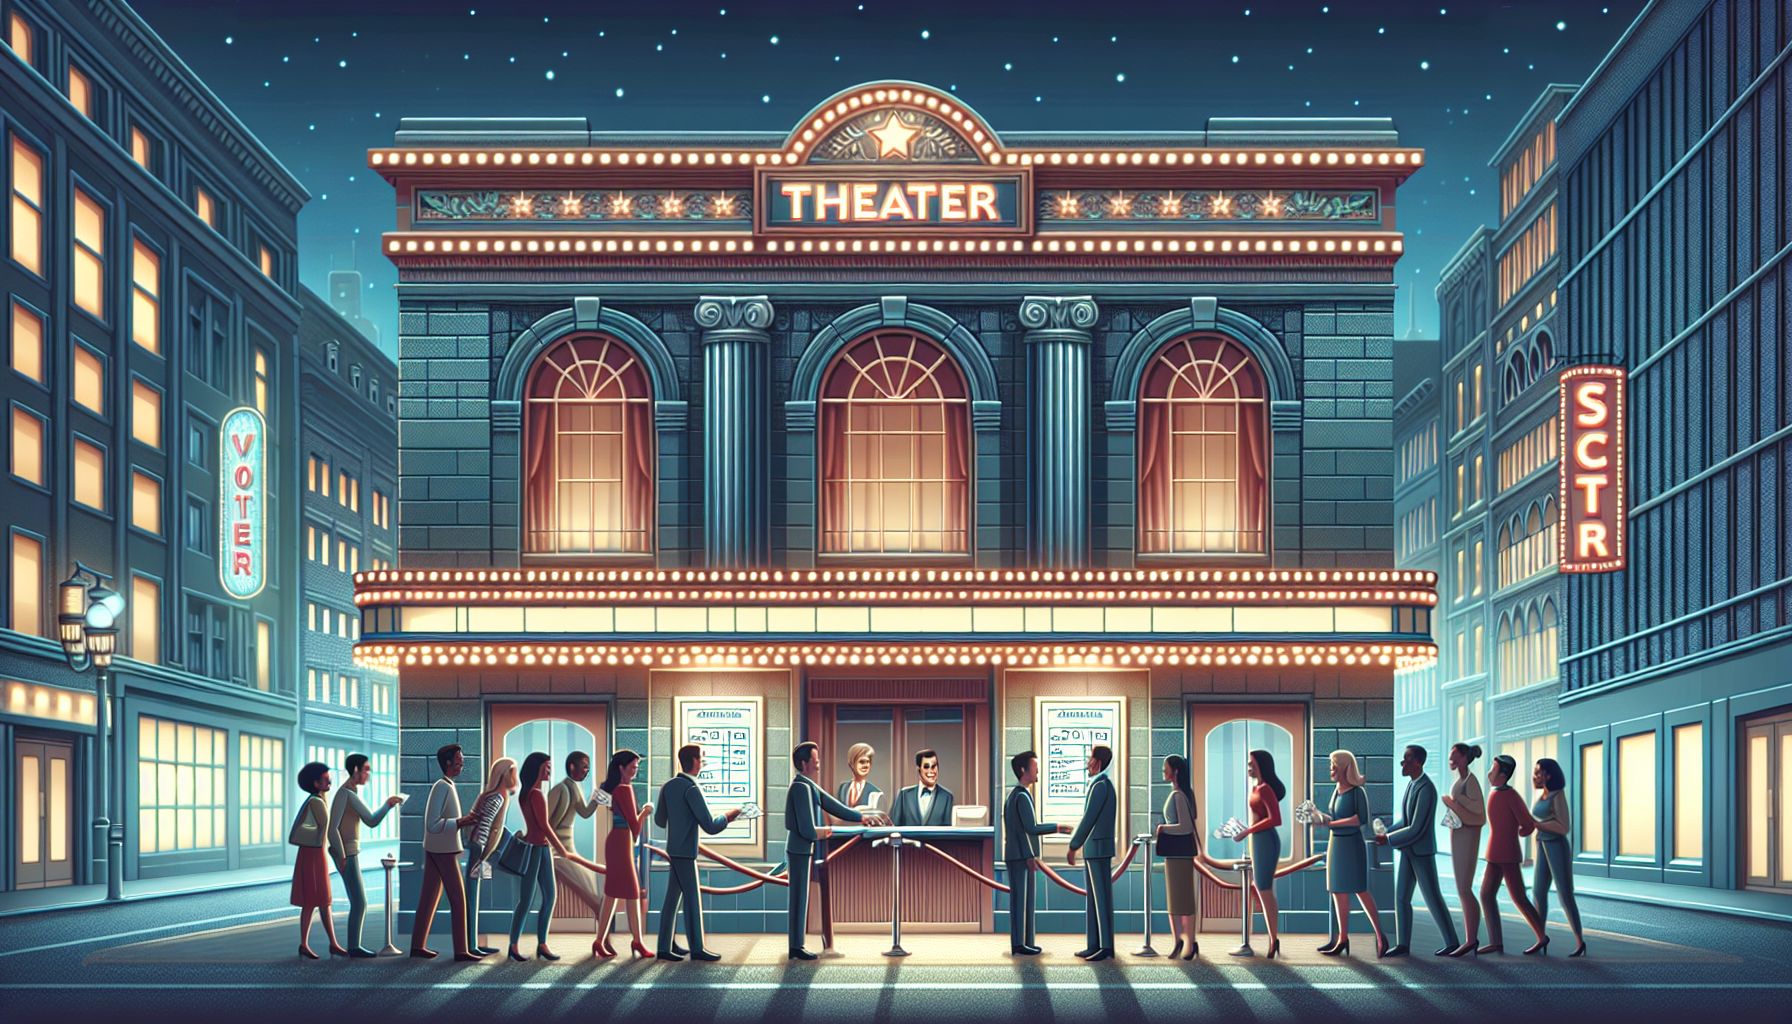 The Art of Theatres: A Winning Business Investment